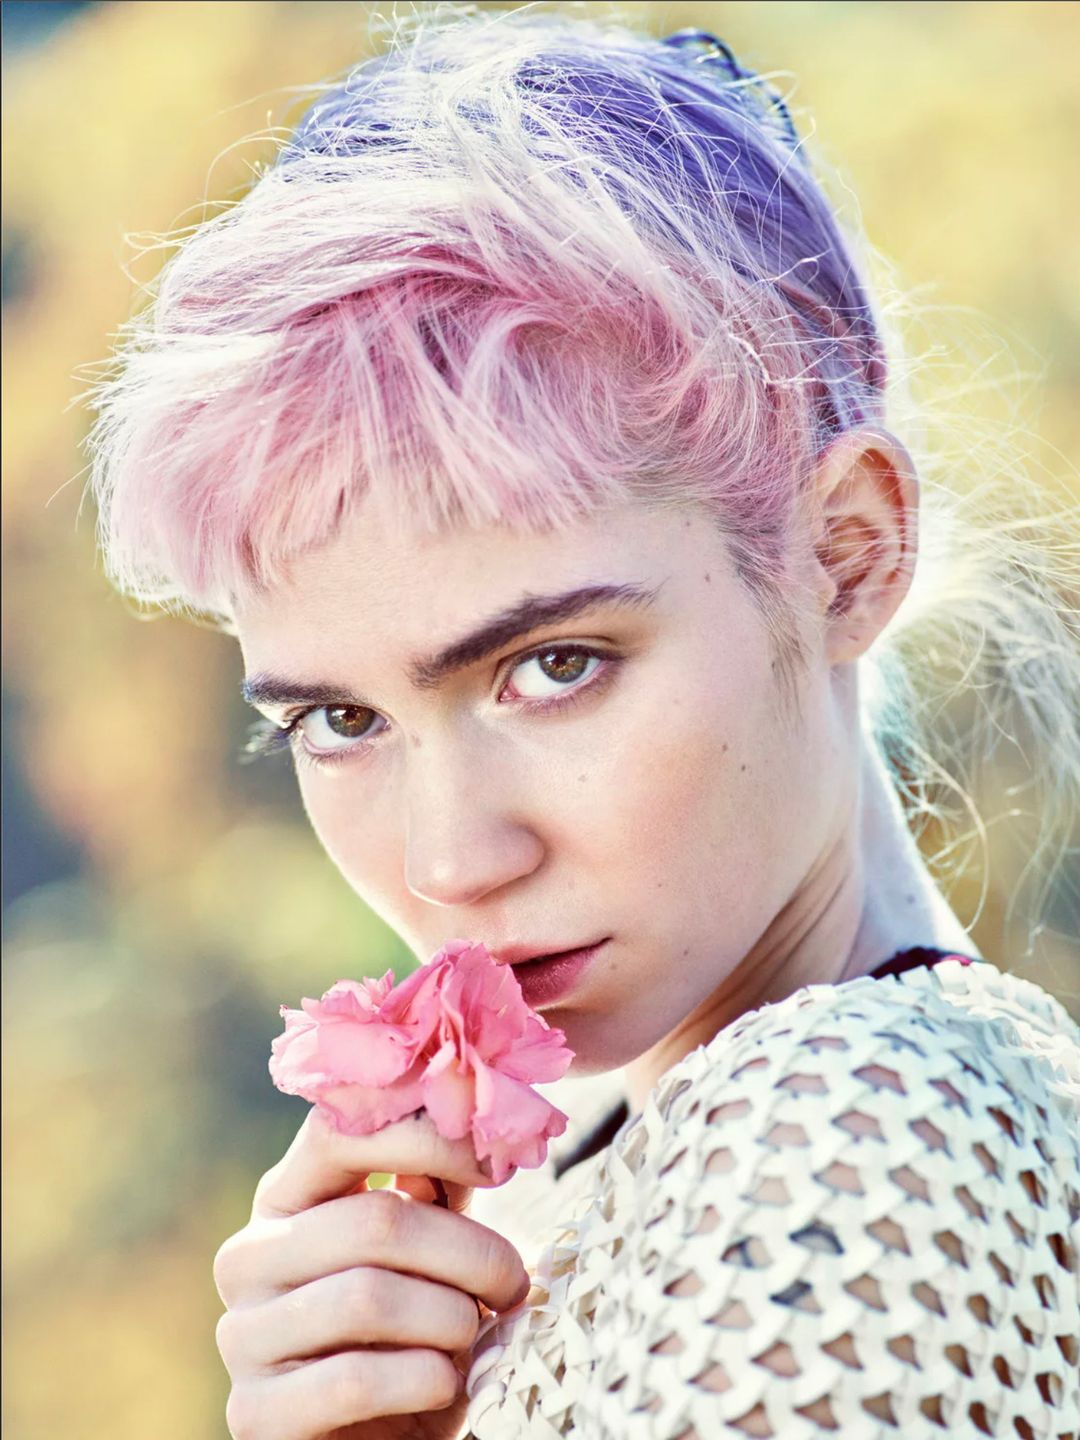 Grimes her zodiac sign